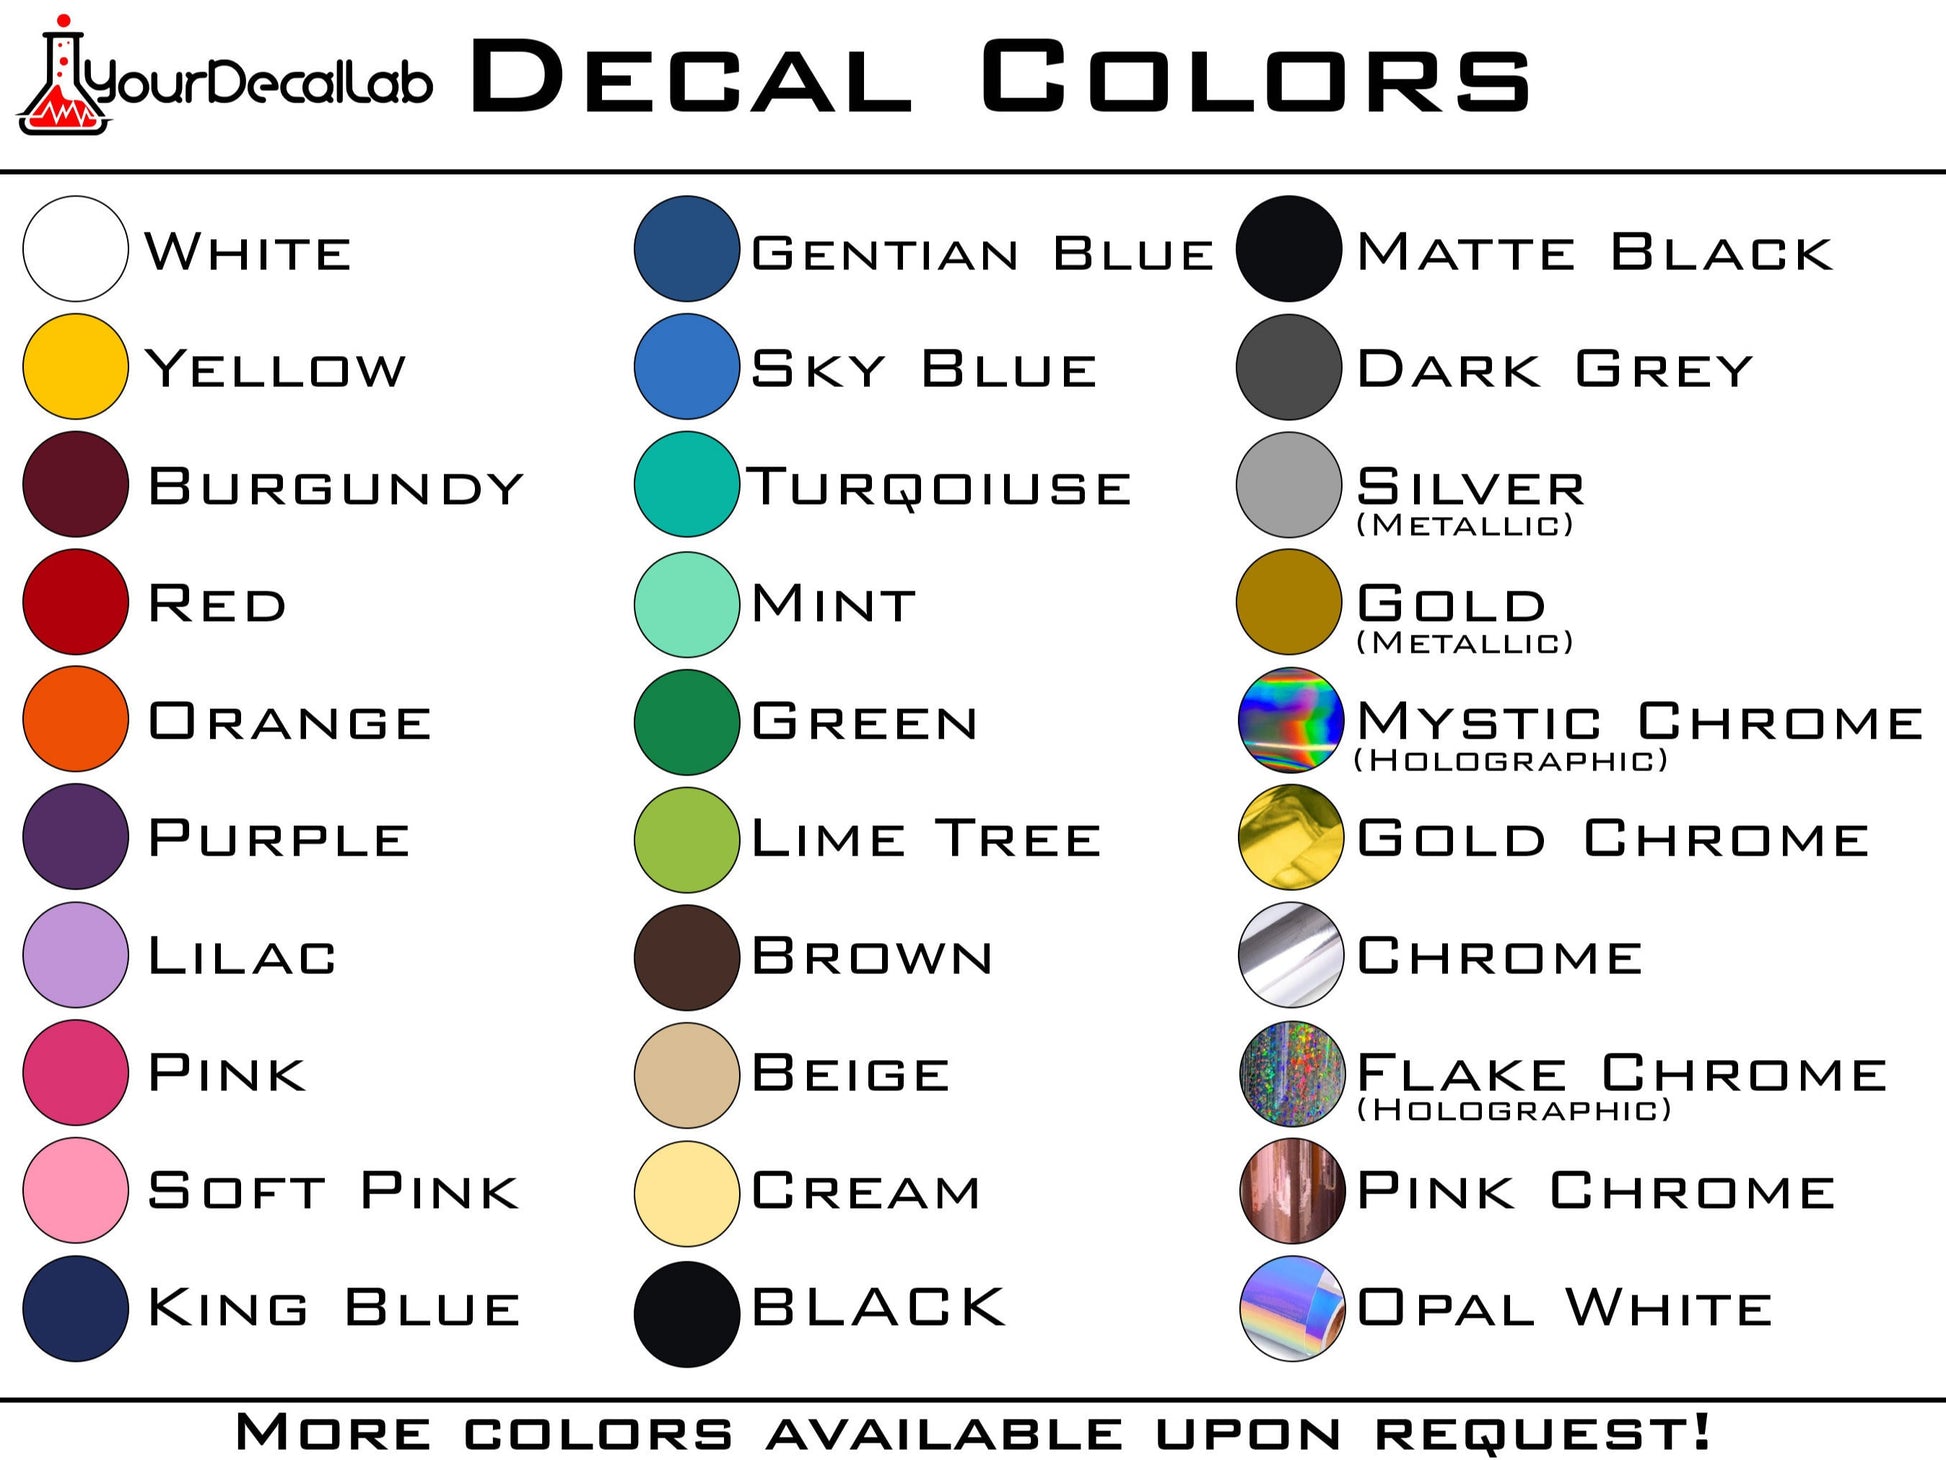 a color chart for different colors of paint